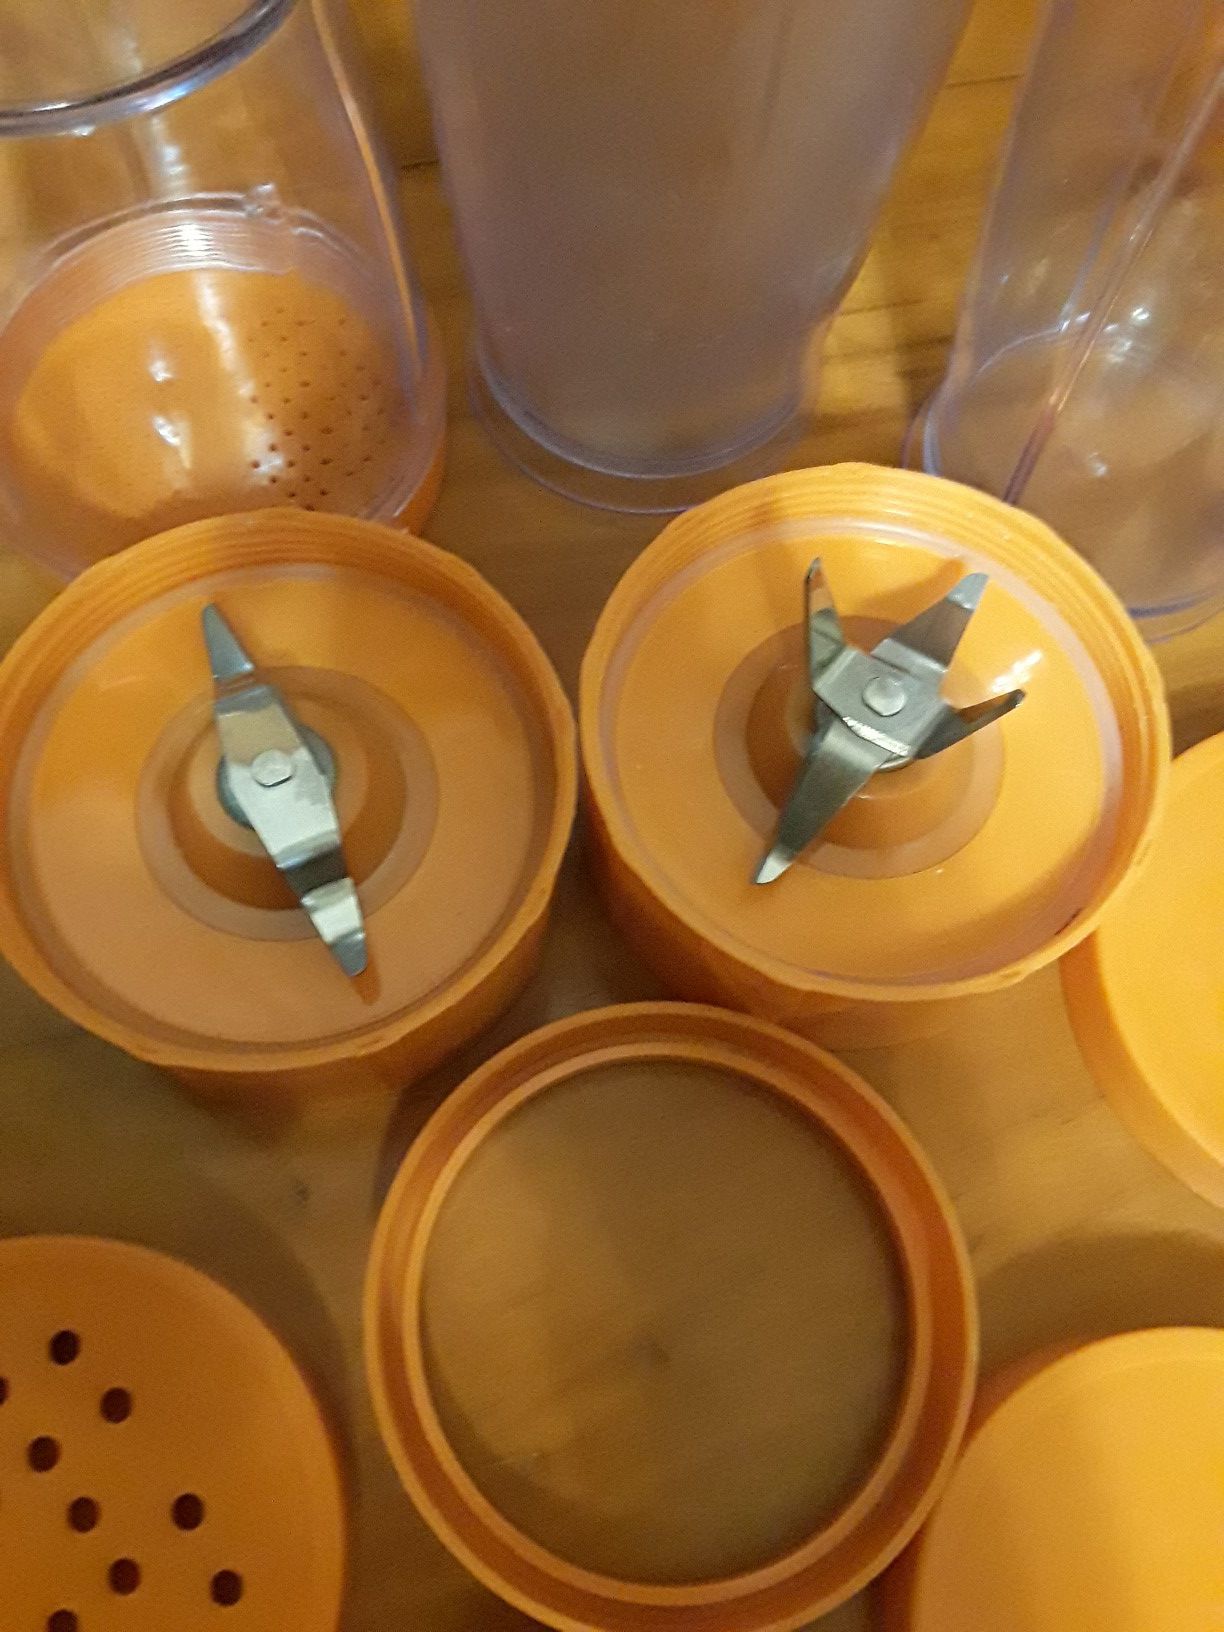 Bella Personal Blender cups lids and blades. Used but in great condition